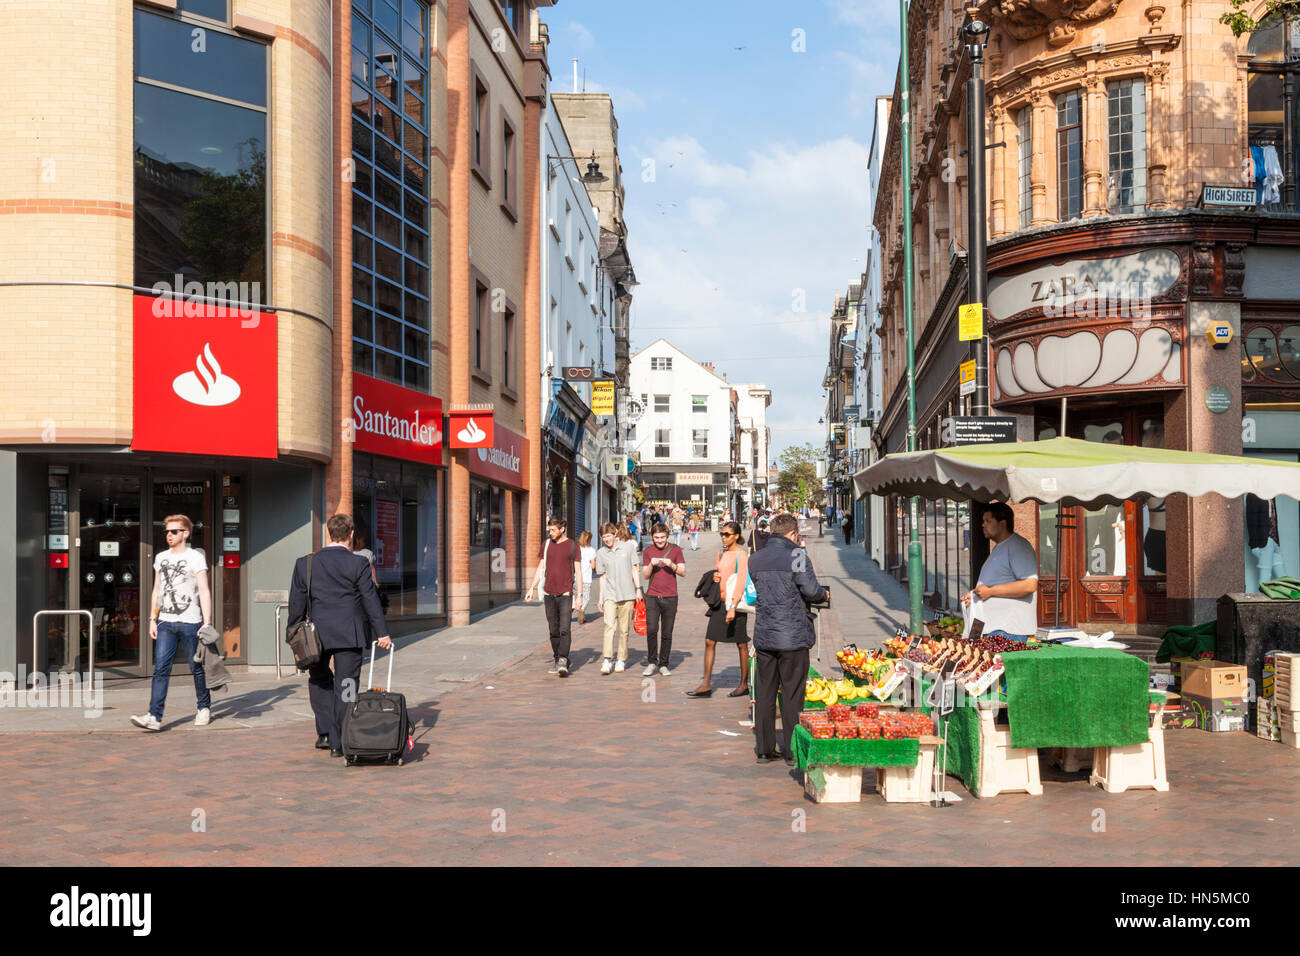 Nottingham city centre street view. Market stall and people on pedestrianised streets, Nottingham, England, UK Stock Photo